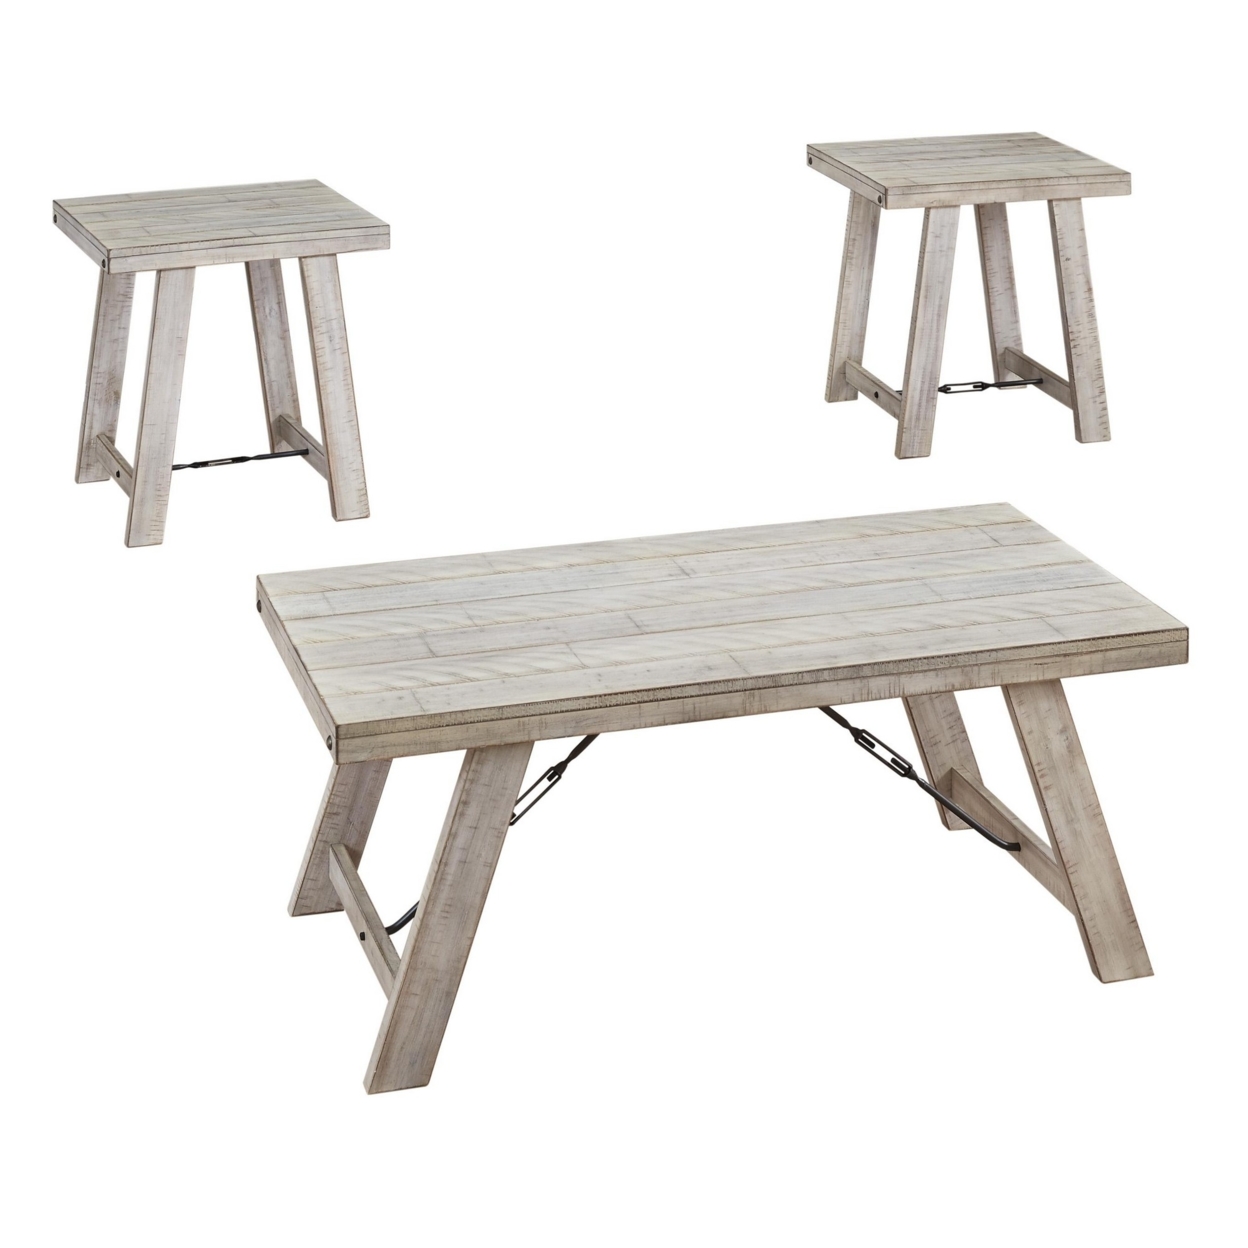 Wooden Table Set With Canted Legs And Tension Bars, Washed White- Saltoro Sherpi